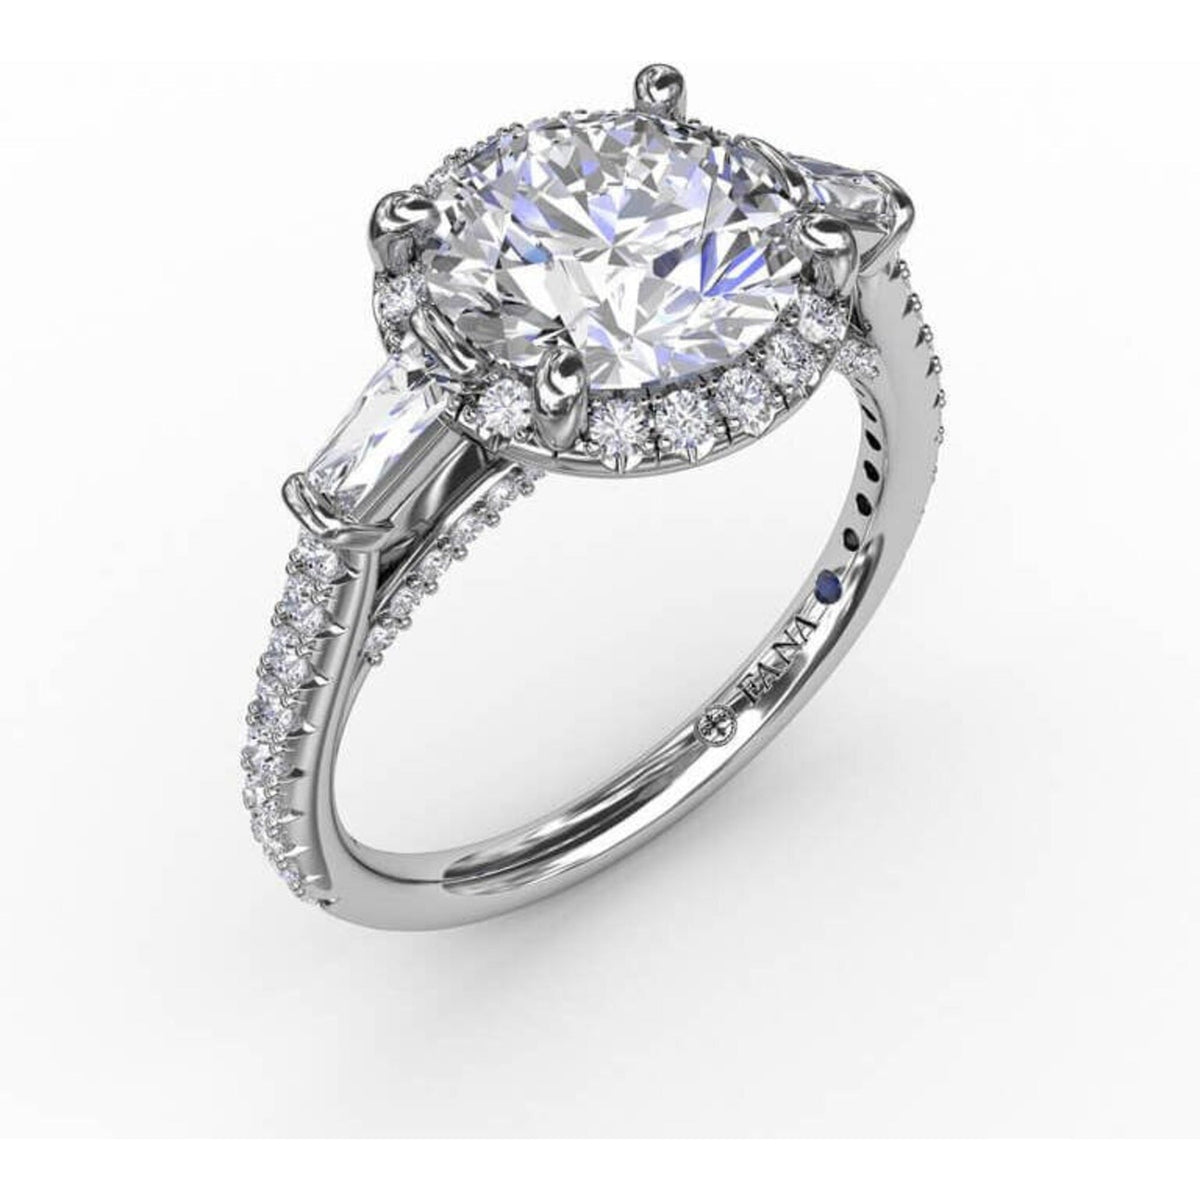 Elegant Vintage Round Diamond Halo Engagement Ring with Tapered Baguettes